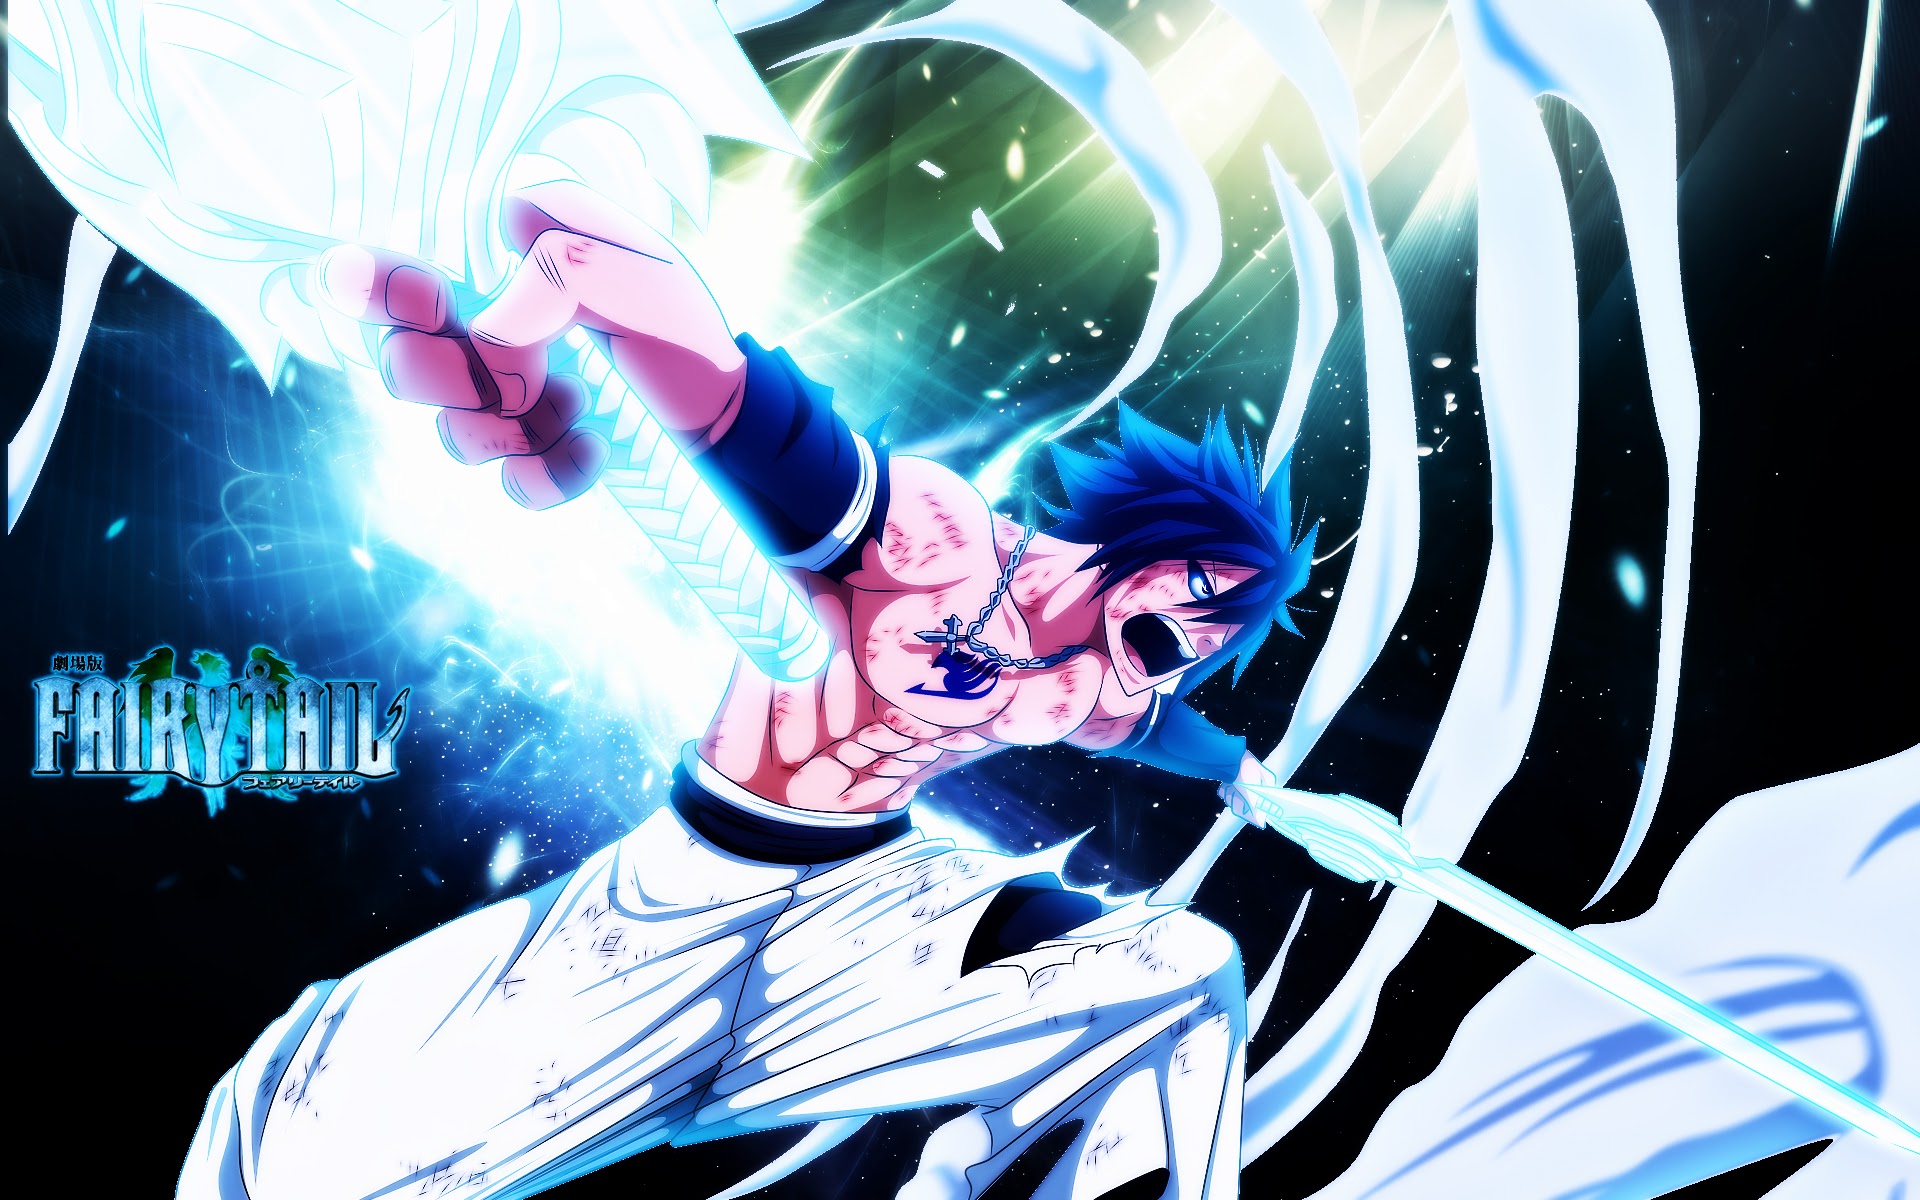 Gray Fullbuster Anime Fairy Tail HD Wallpaper Image Picture